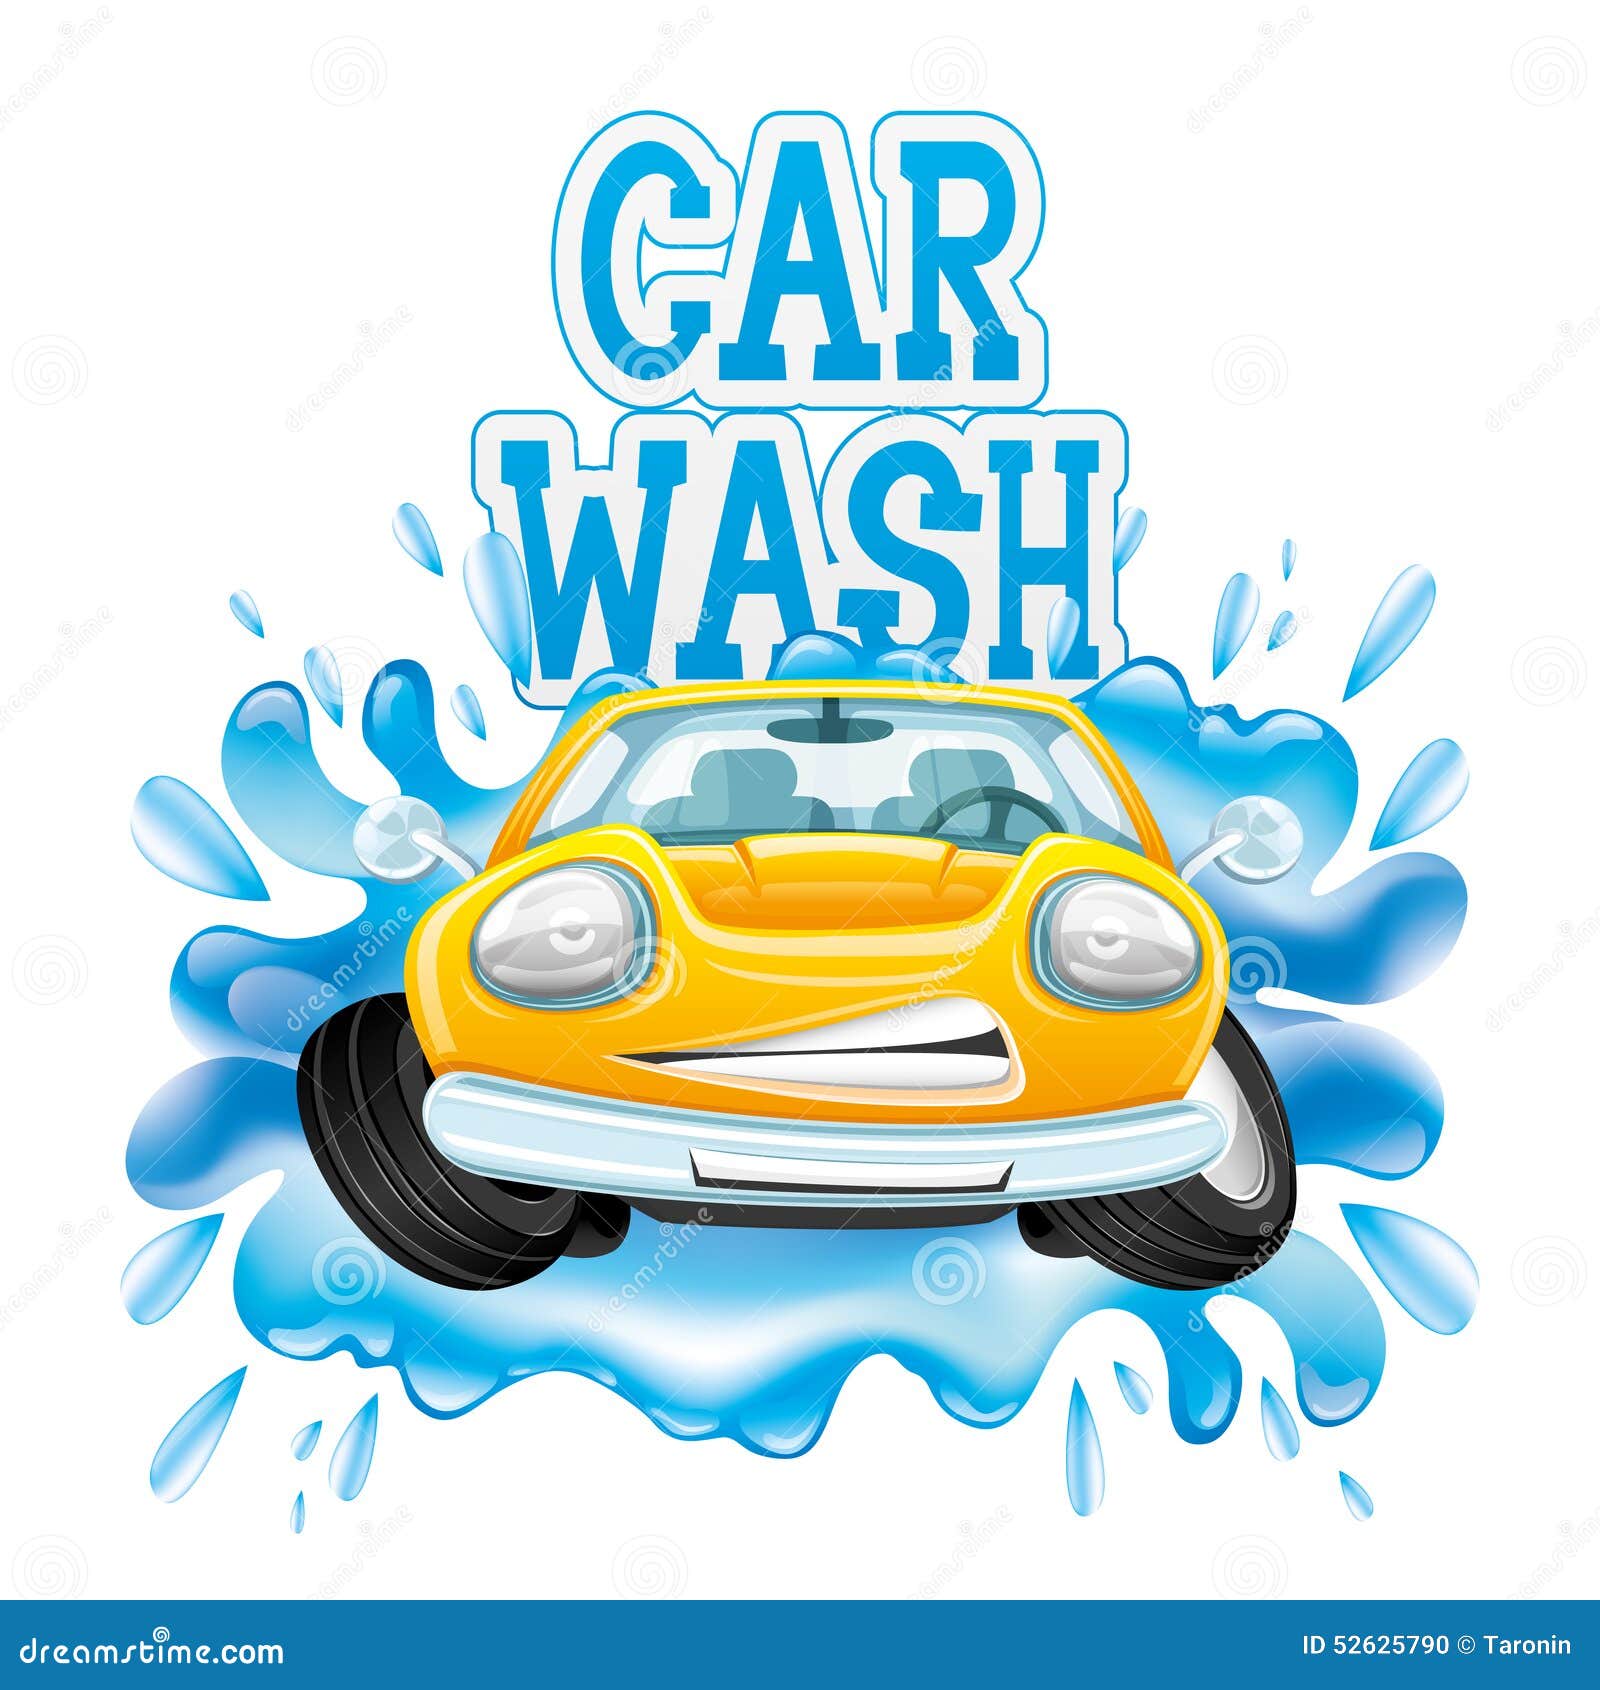 car wash clipart free download - photo #39